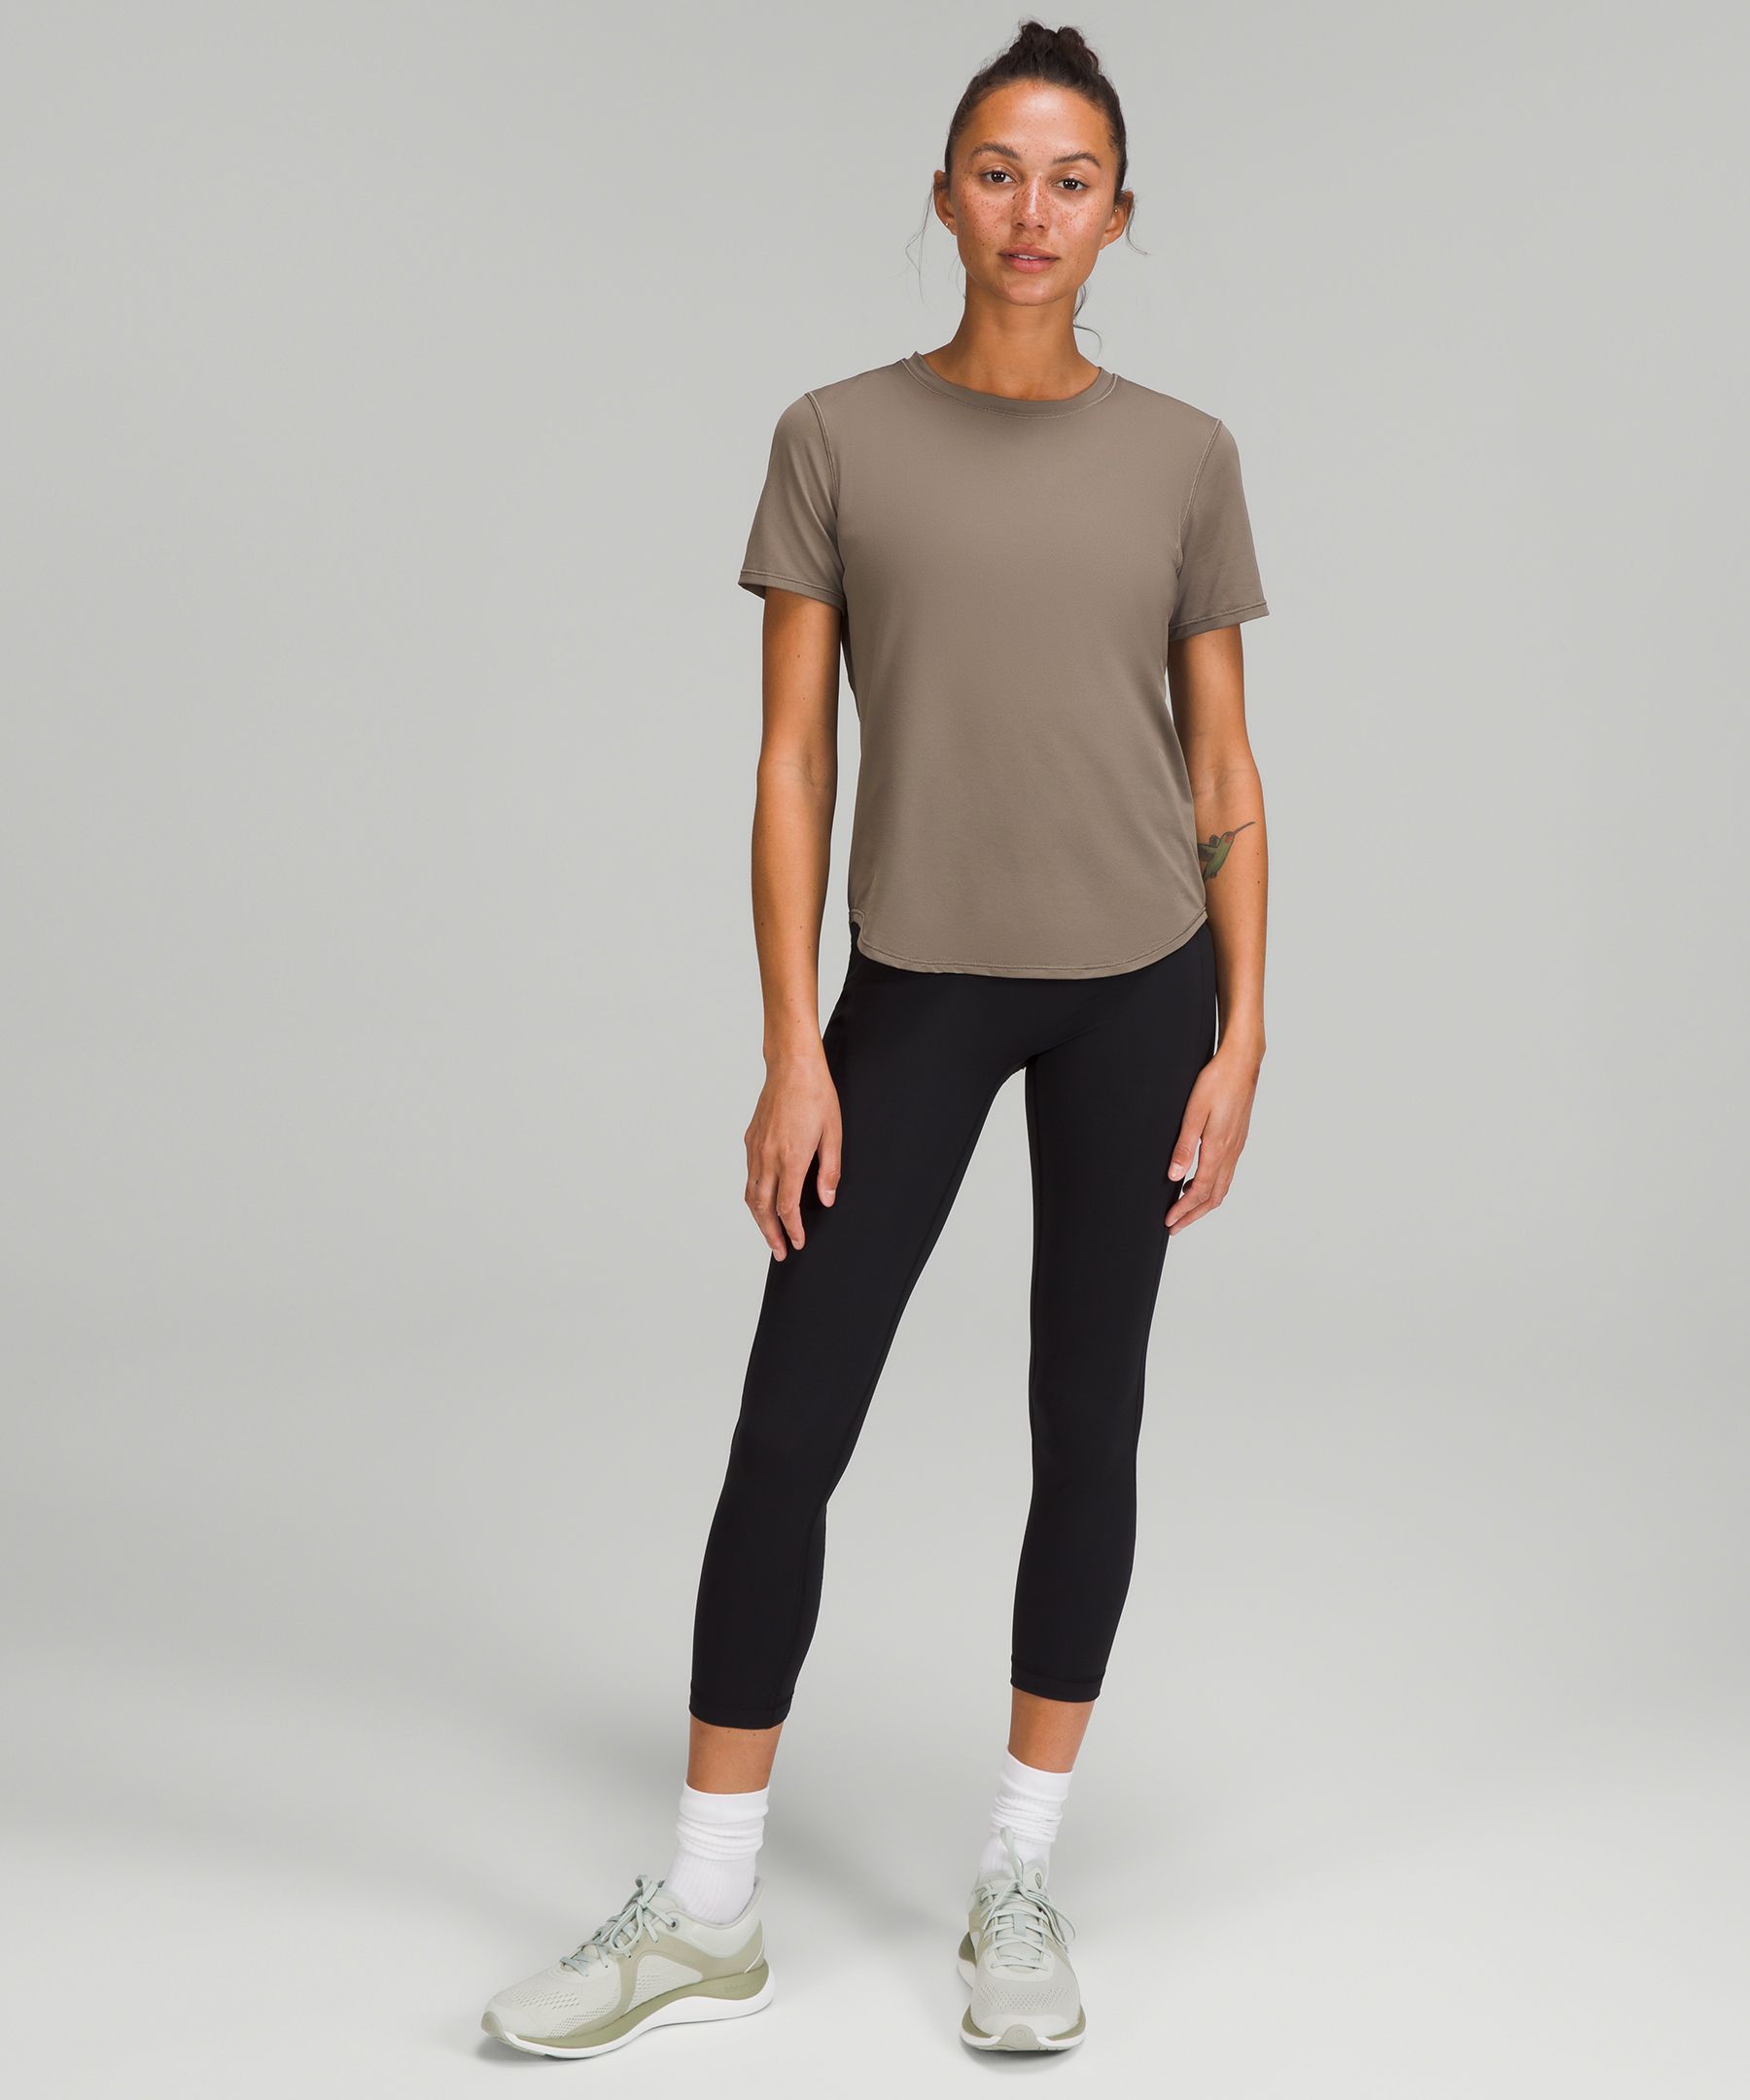 Lululemon High-neck Running And Training T-shirt In Rover